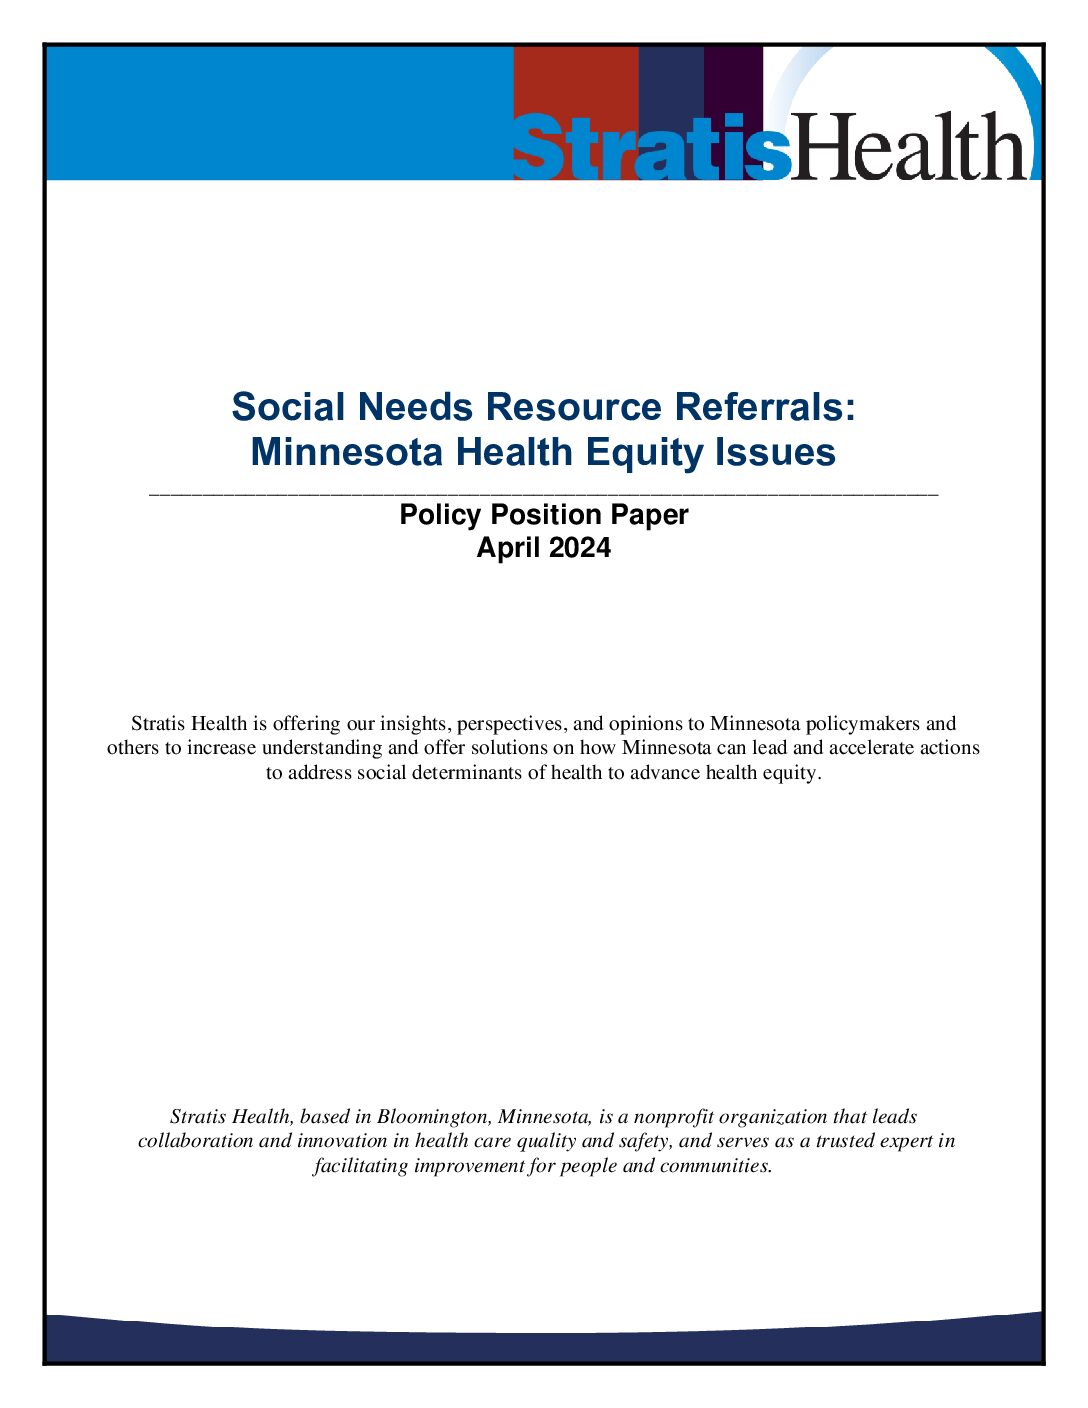 Social Needs Resource Referrals: Minnesota Health Equity Issues